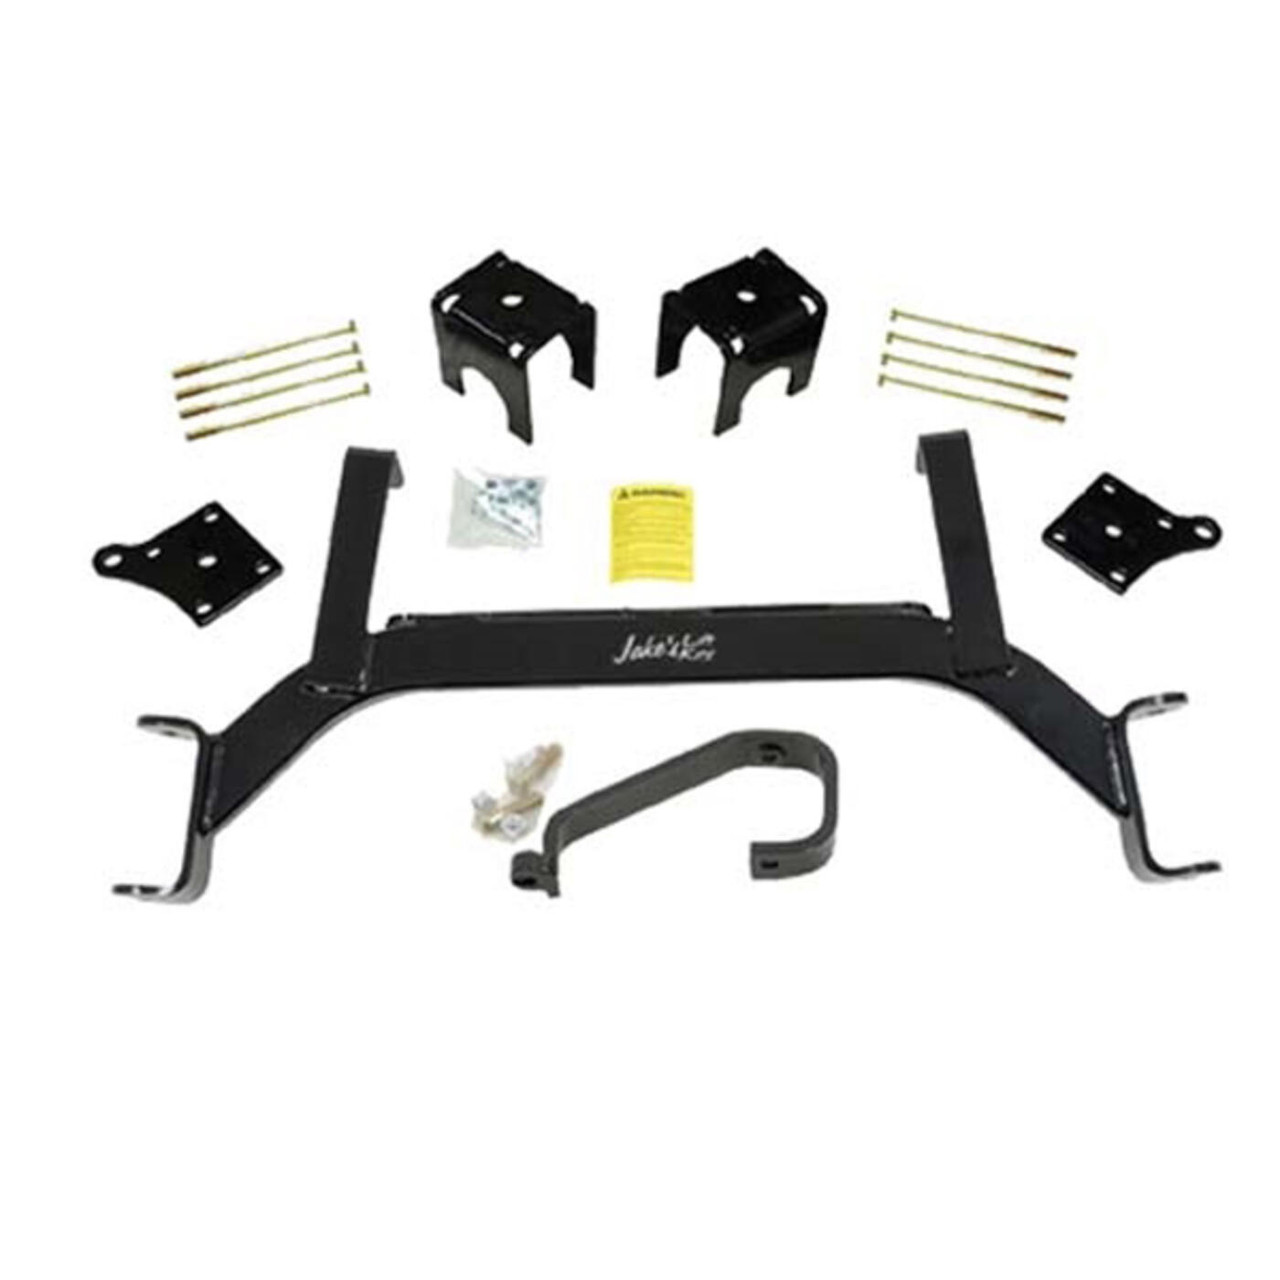 Jakes 5" Lift Kit for E-Z-GO TXT/T48 Electric Golf Cart (2013-Up), 7230